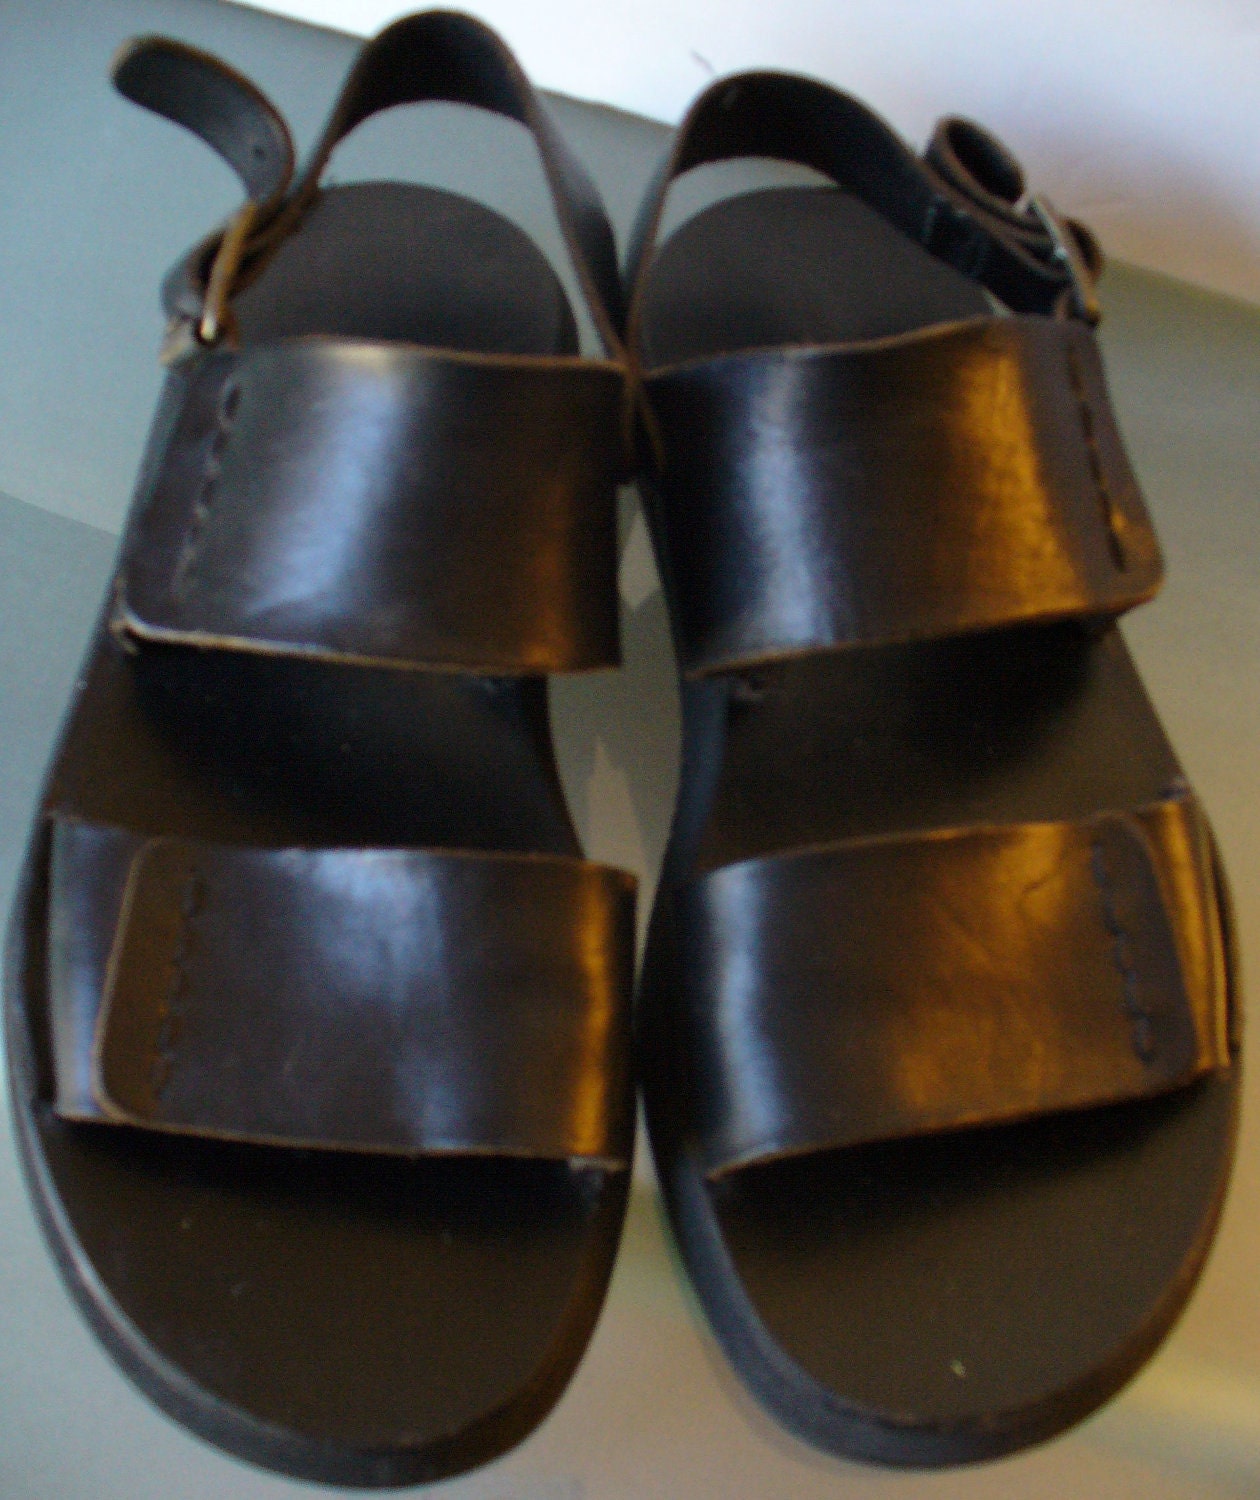 Banana Republic Men's Sandals Made in Italy Size 9